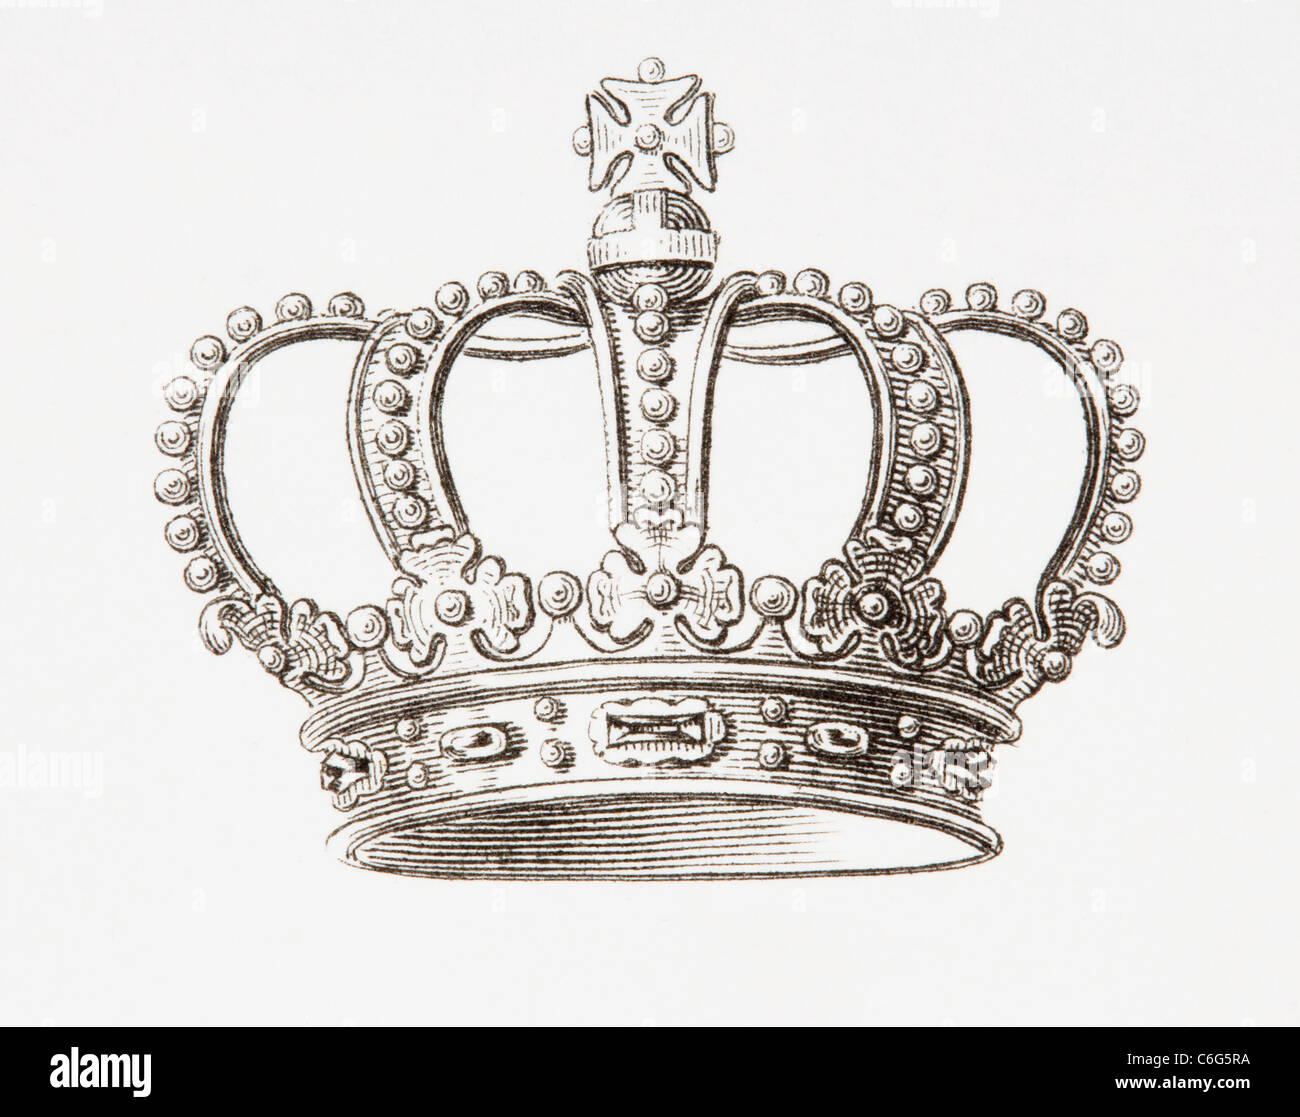 Crown of the Kingdom of the Netherlands. Stock Photo